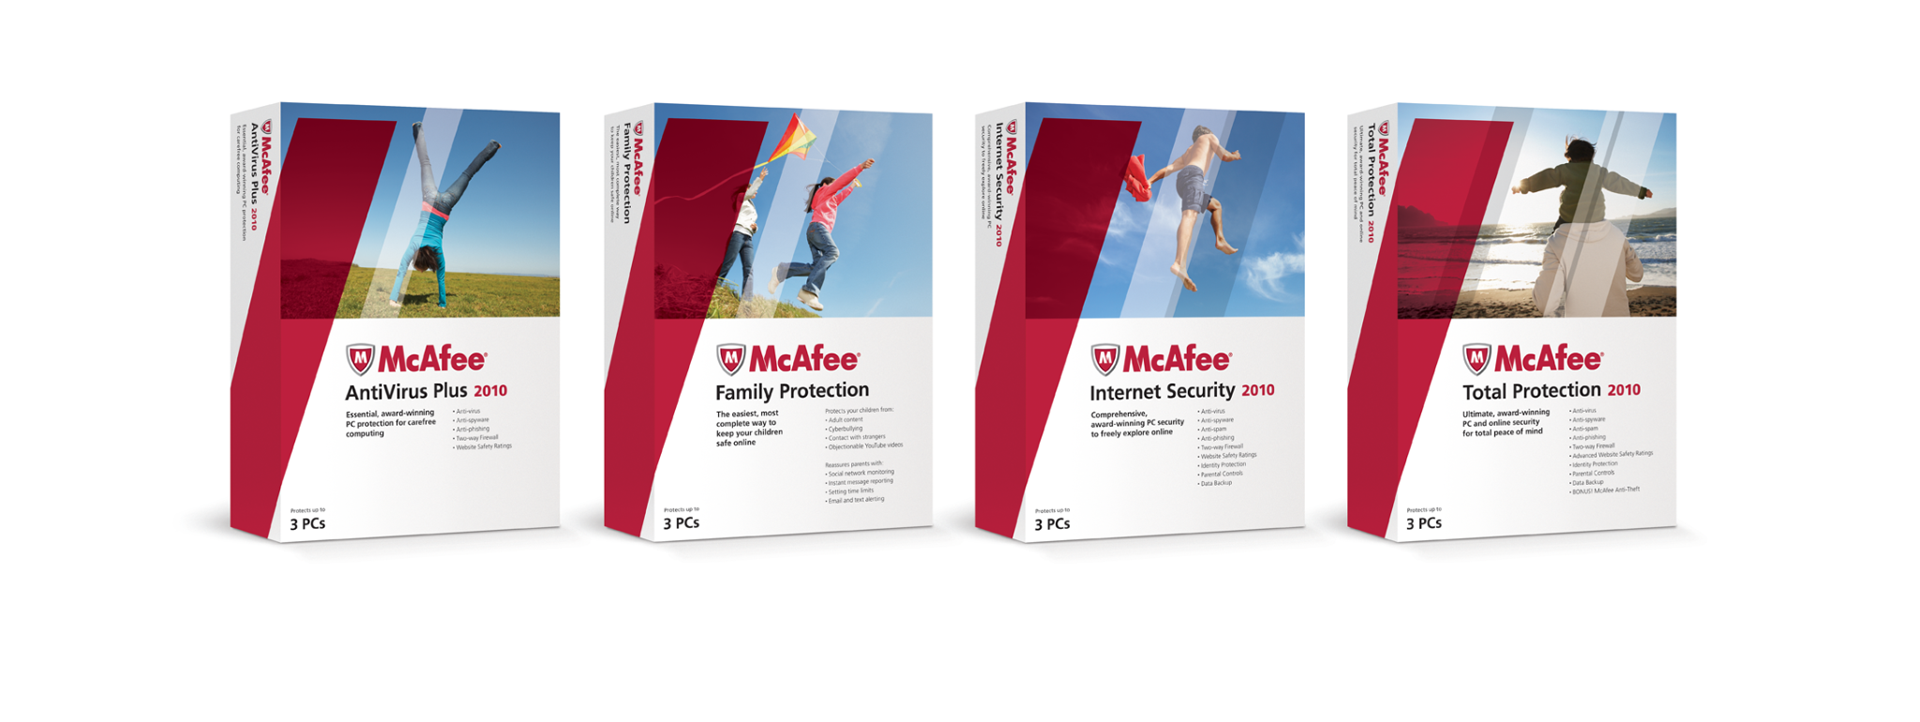 mcafee_product_suite_4_9201720